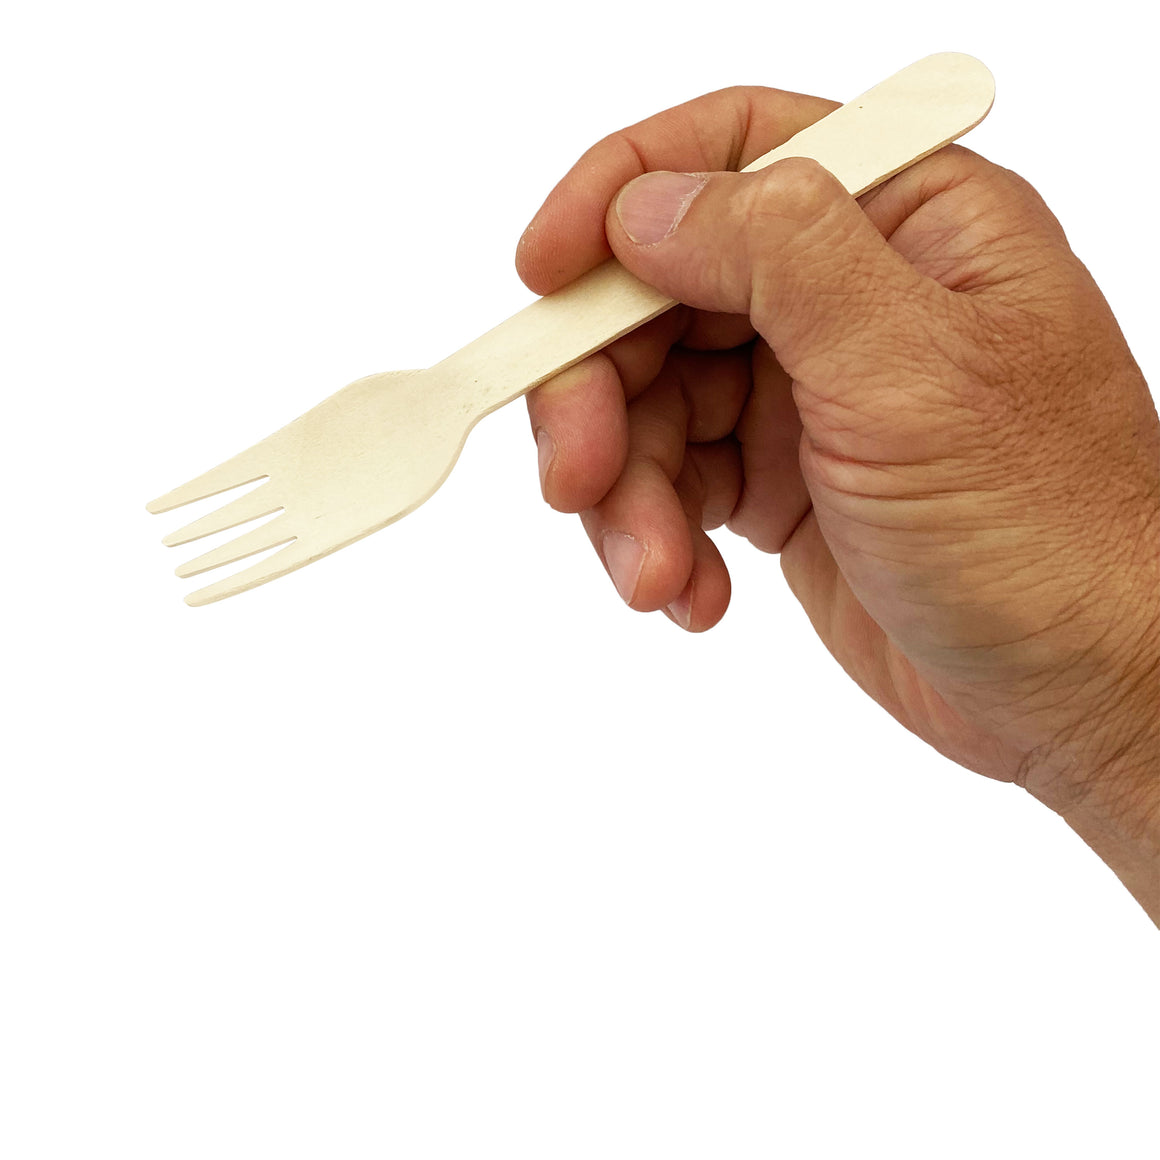 KingSeal FSC® C041262 Certified Disposable Wood Cutlery, Knives, Forks, and Spoons - Bulk Pack